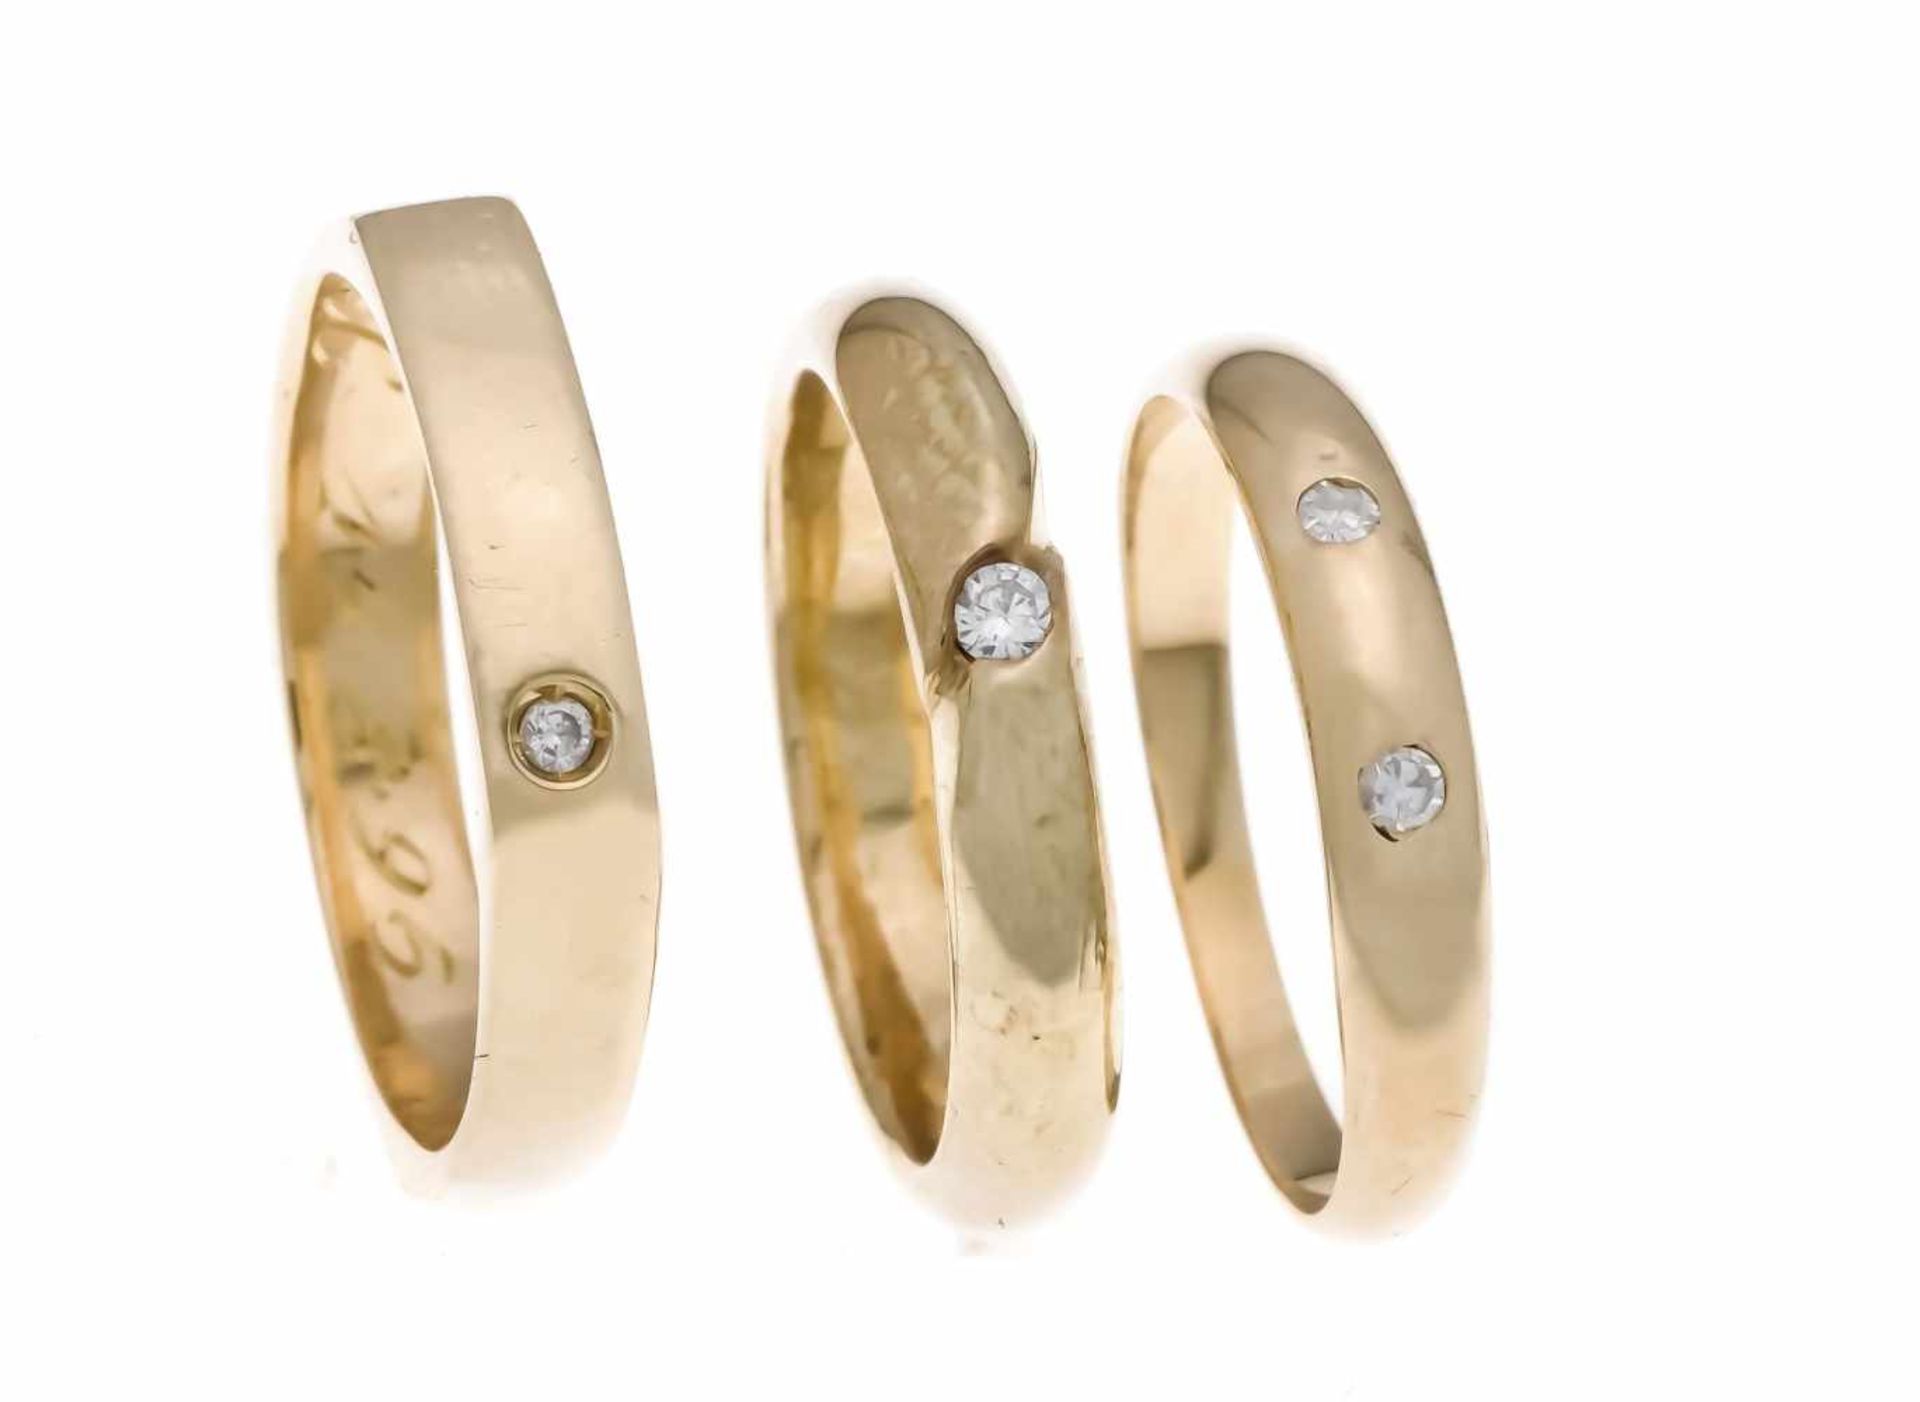 Mixed lot of 3 rings GG 585/000 with 2 brilliants and 2 diamonds, total 0.10 ct TW / SI,